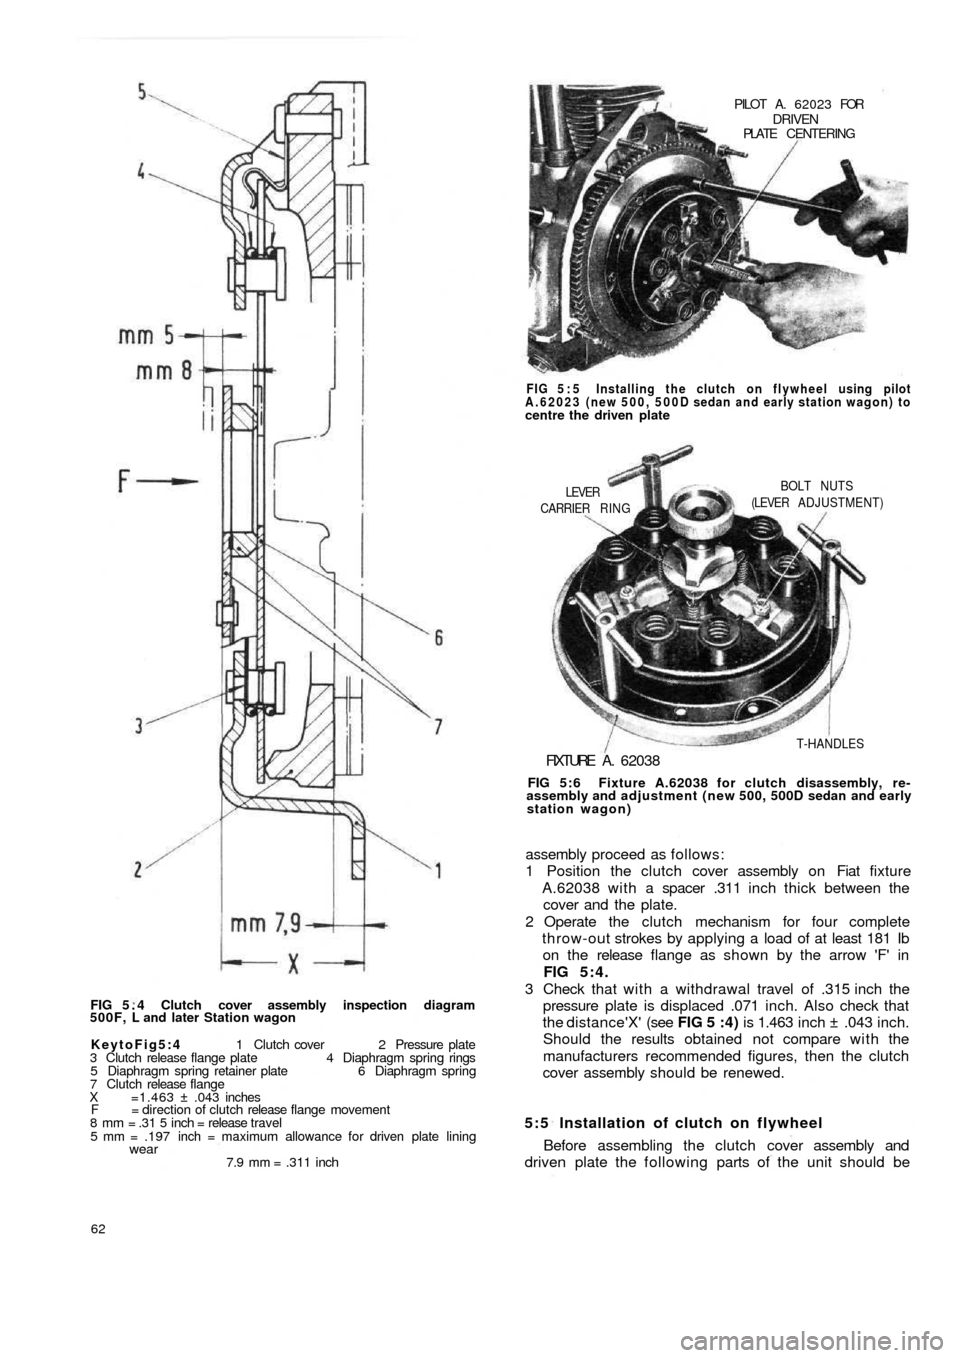 FIAT 500 1971 1.G Workshop Manual FIG 5 . 4  Clutch cover assembly inspection diagram
500F, L and later Station wagon
KeytoFig5:4 1 Clutch cover 2 Pressure plate
3 Clutch release flange plate 4 Diaphragm spring rings
5 Diaphragm sprin